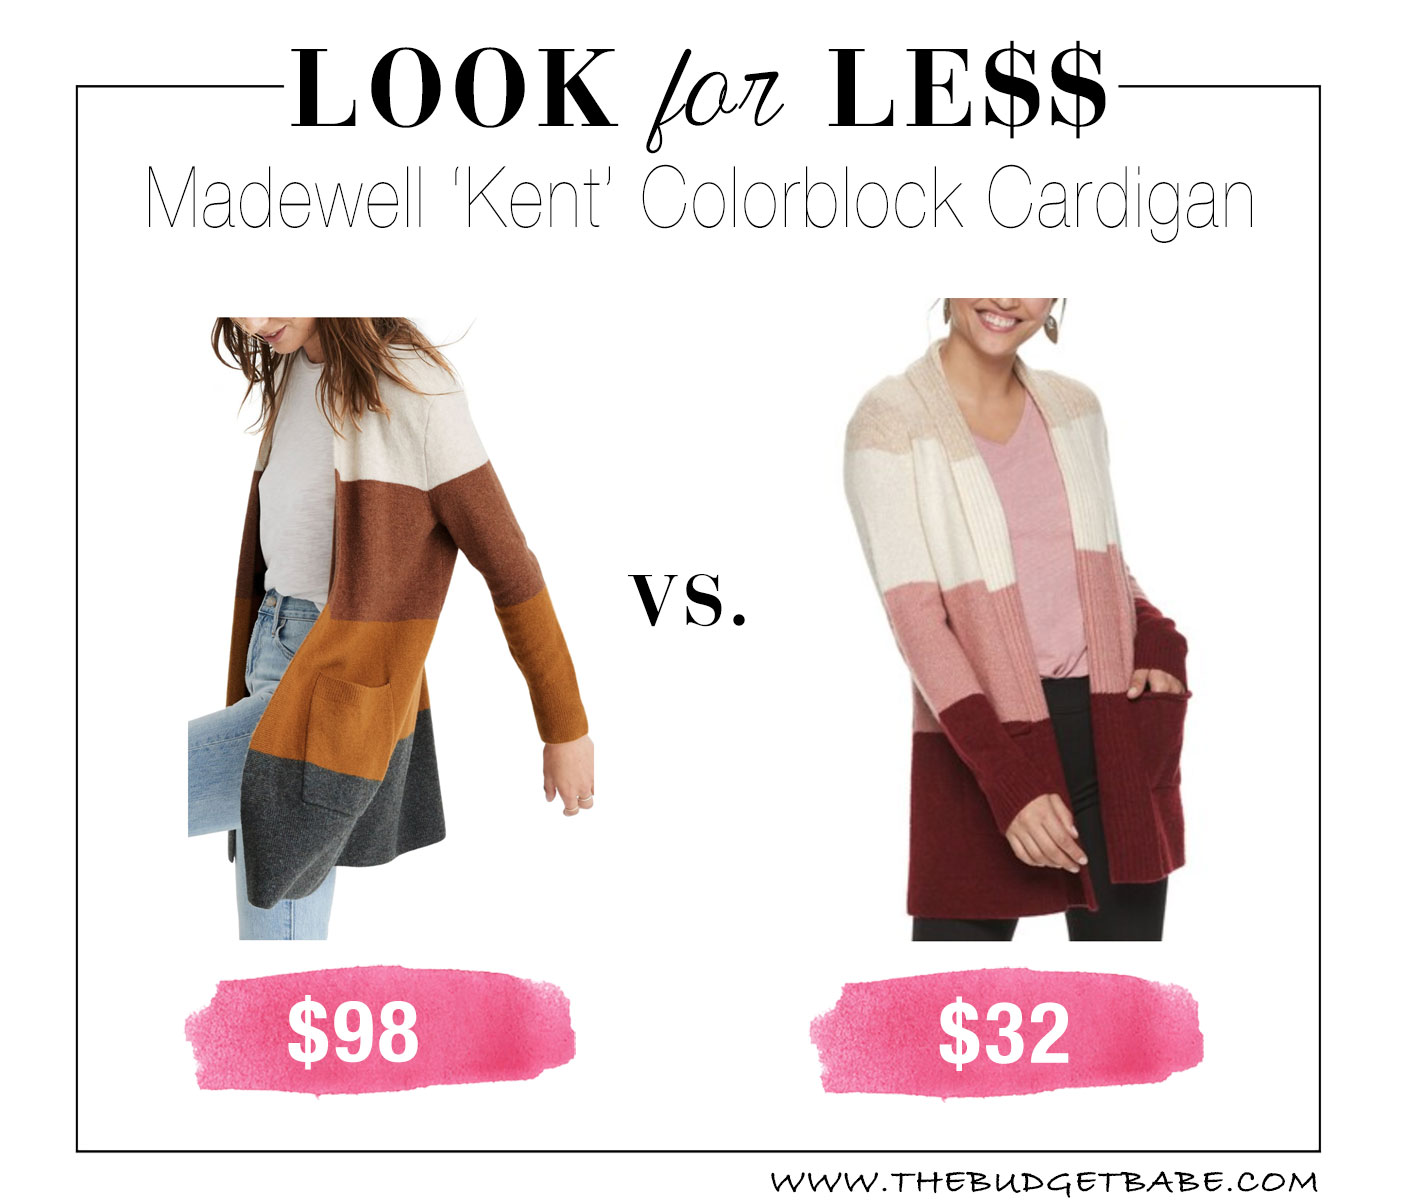 Looks like Madewell for less